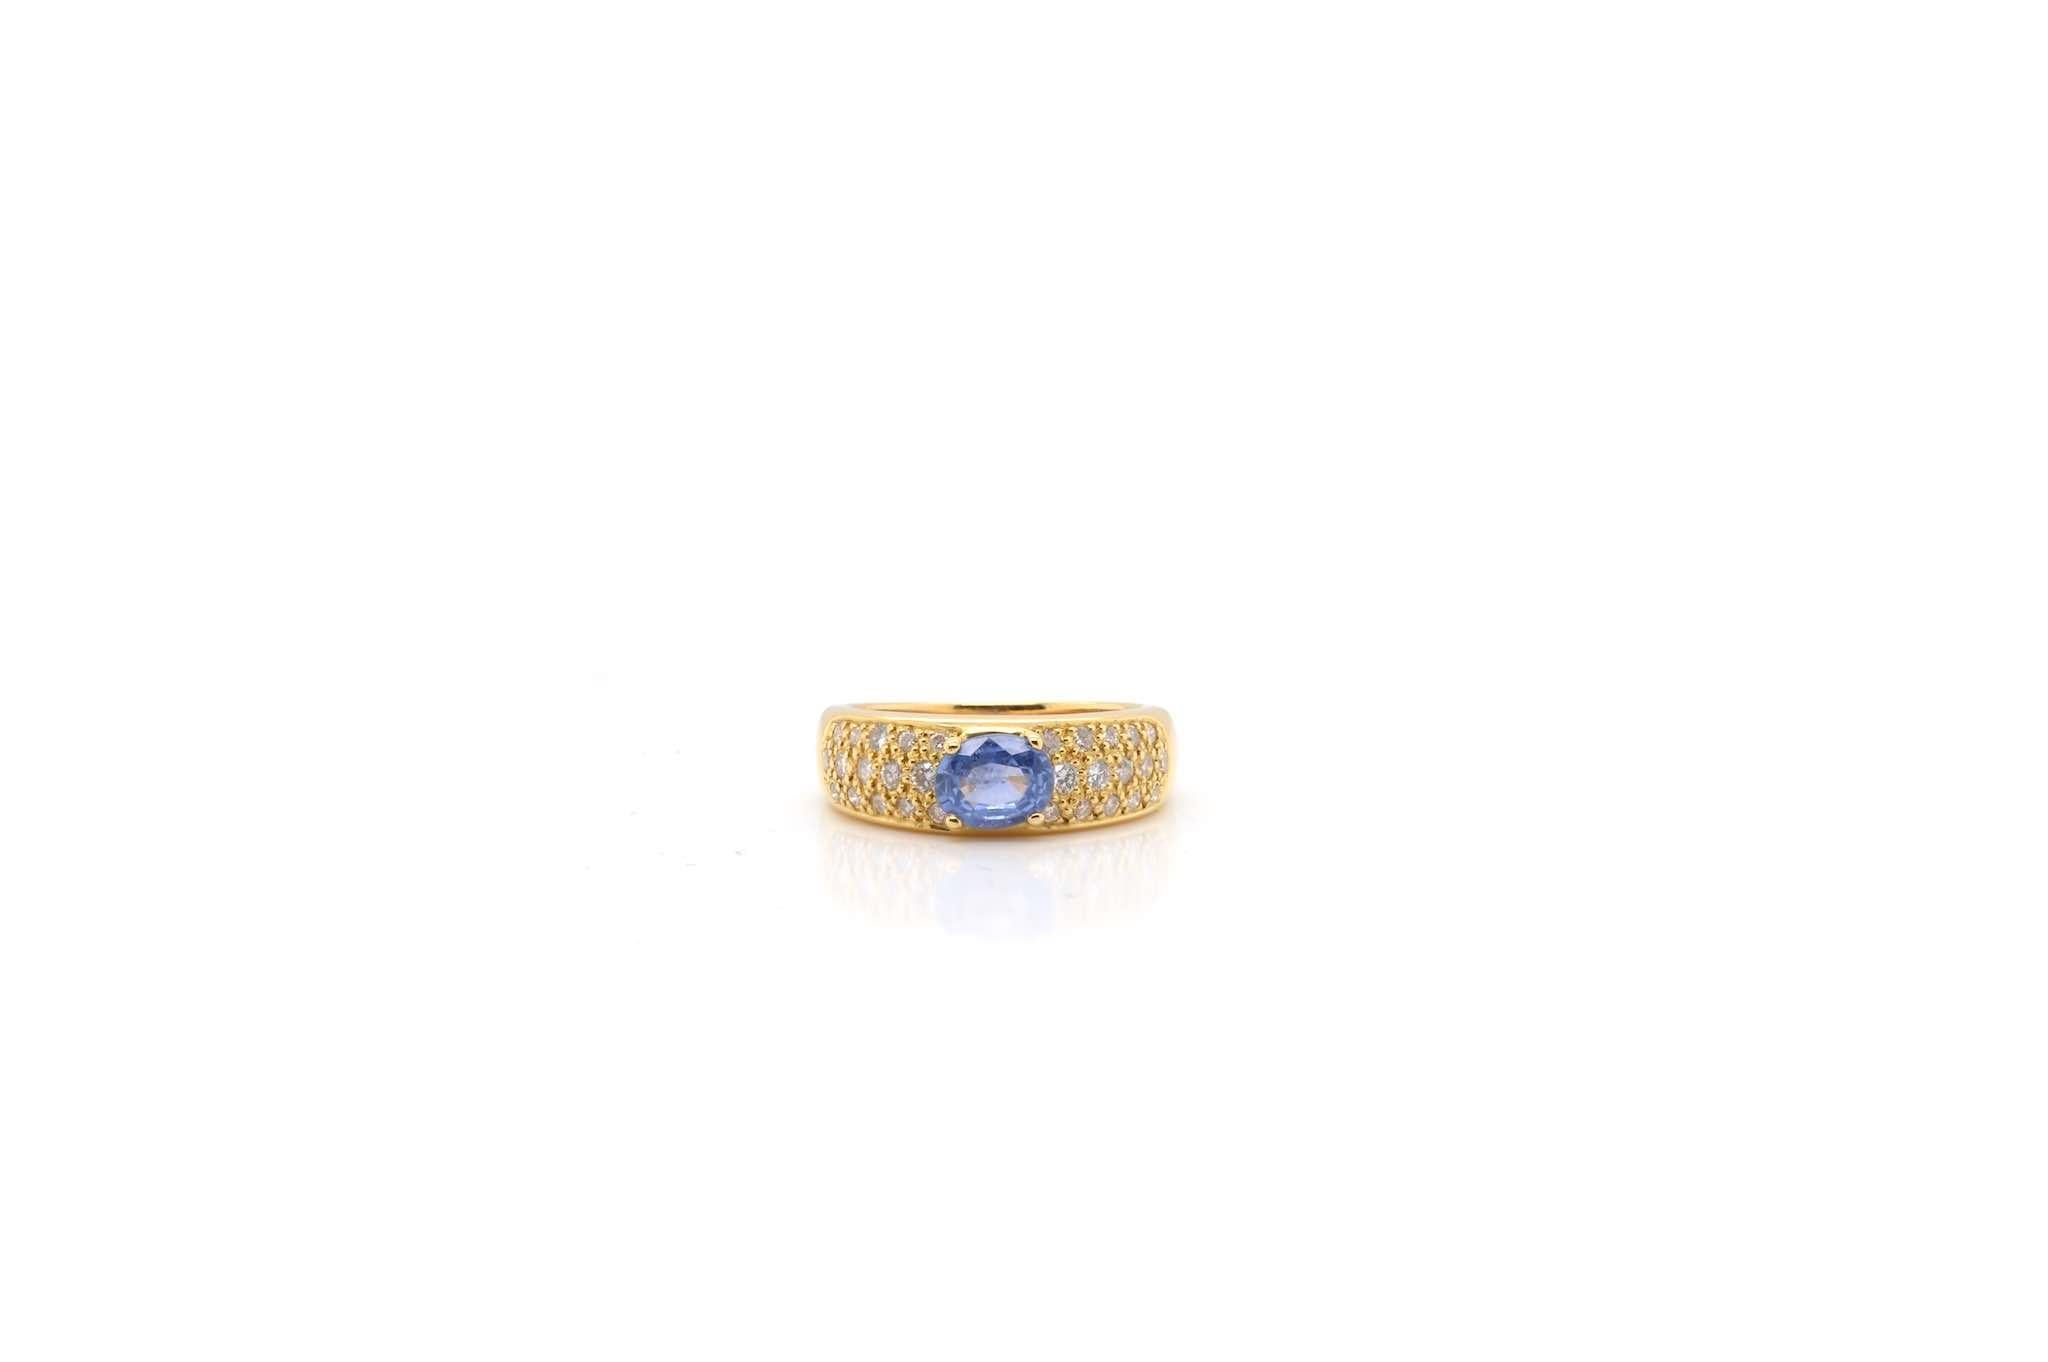 Stones: Ceylon sapphire of approximately 1 carat
and diamonds for a total weight of 0.60 carat
Material: 18k yellow gold
Weight: 7.8g
Size: 54 (free sizing)
Certificate
Ref. : 23991